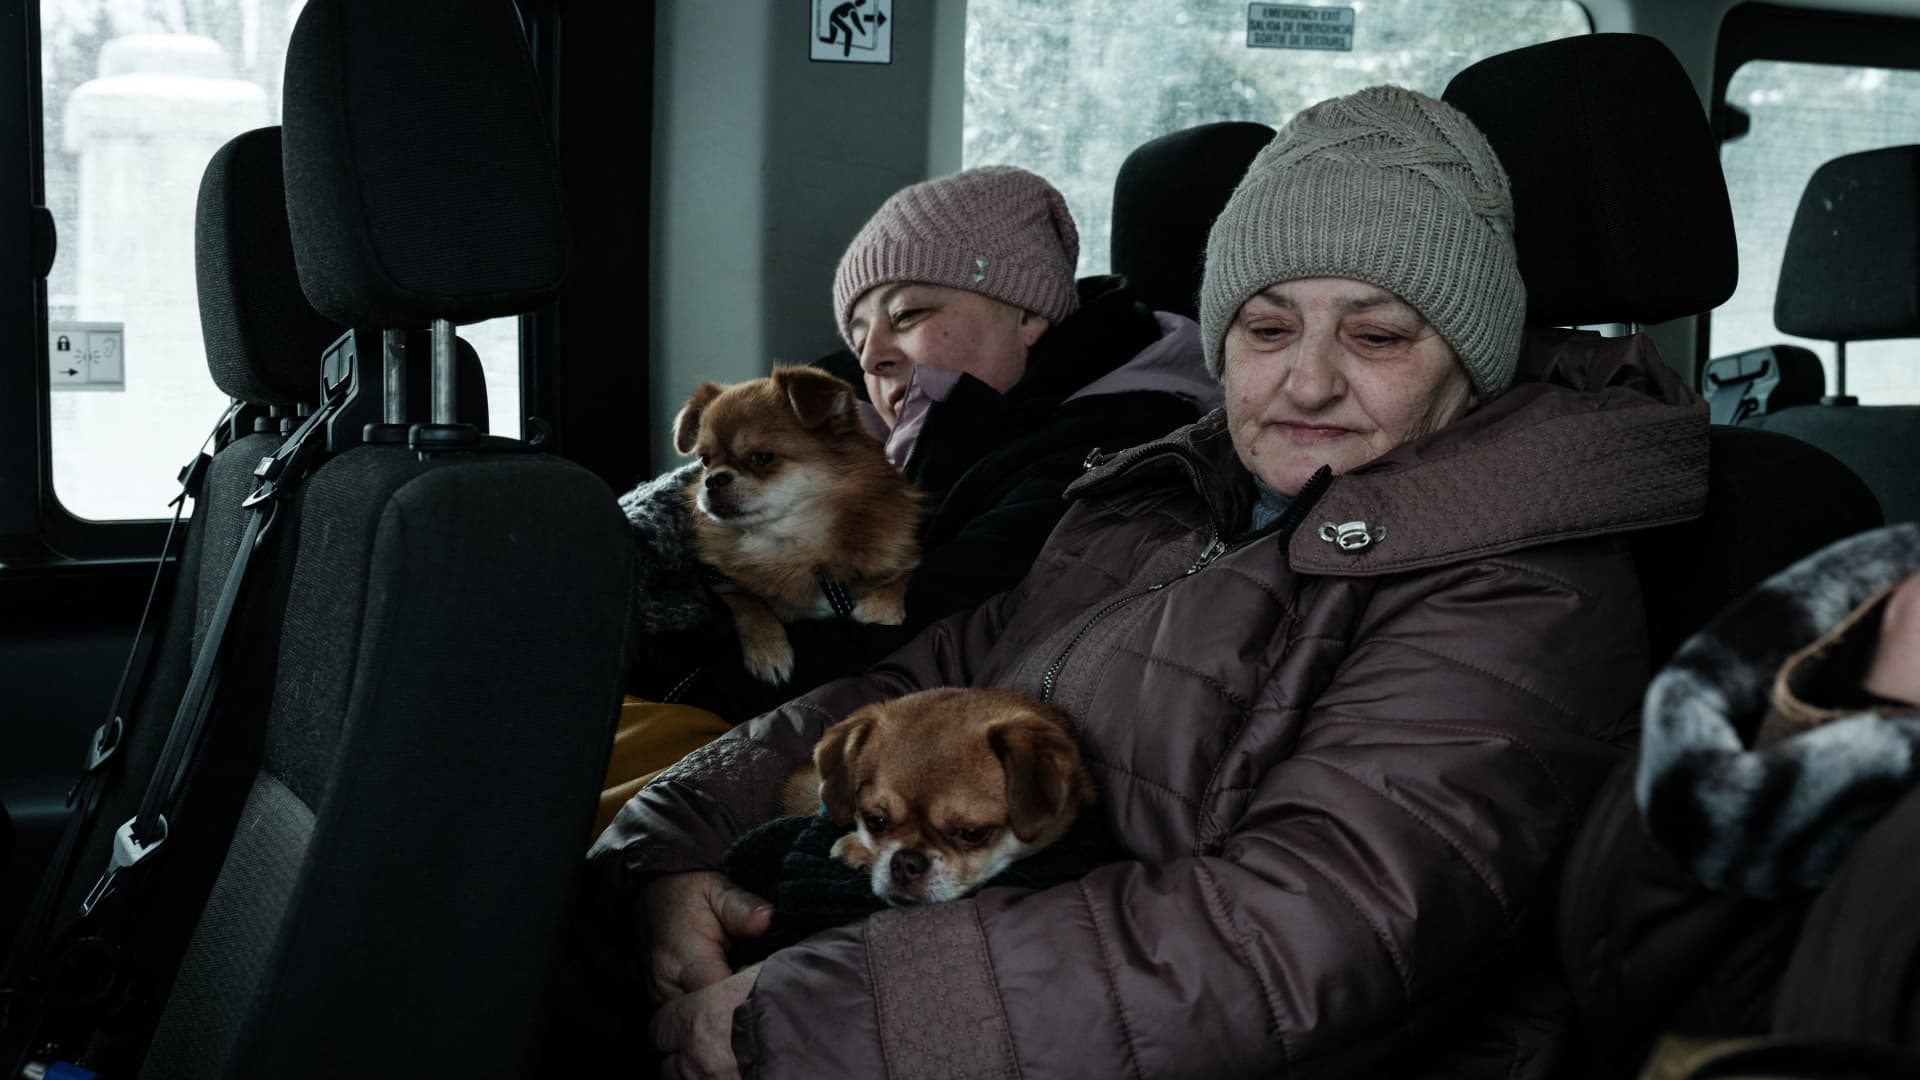 Lubov (R), 65, and her daugther Elena, 45, sit in the evacuation van with their dogs, in Chasiv Yar on February 15, 2023, amid the Russian invasion of Ukraine. - The minibus, operated by the charity Save Ukraine, picks its way through the snow-covered streets on the way to its next pick-up, taking advantage of a relative lull in the firing. 